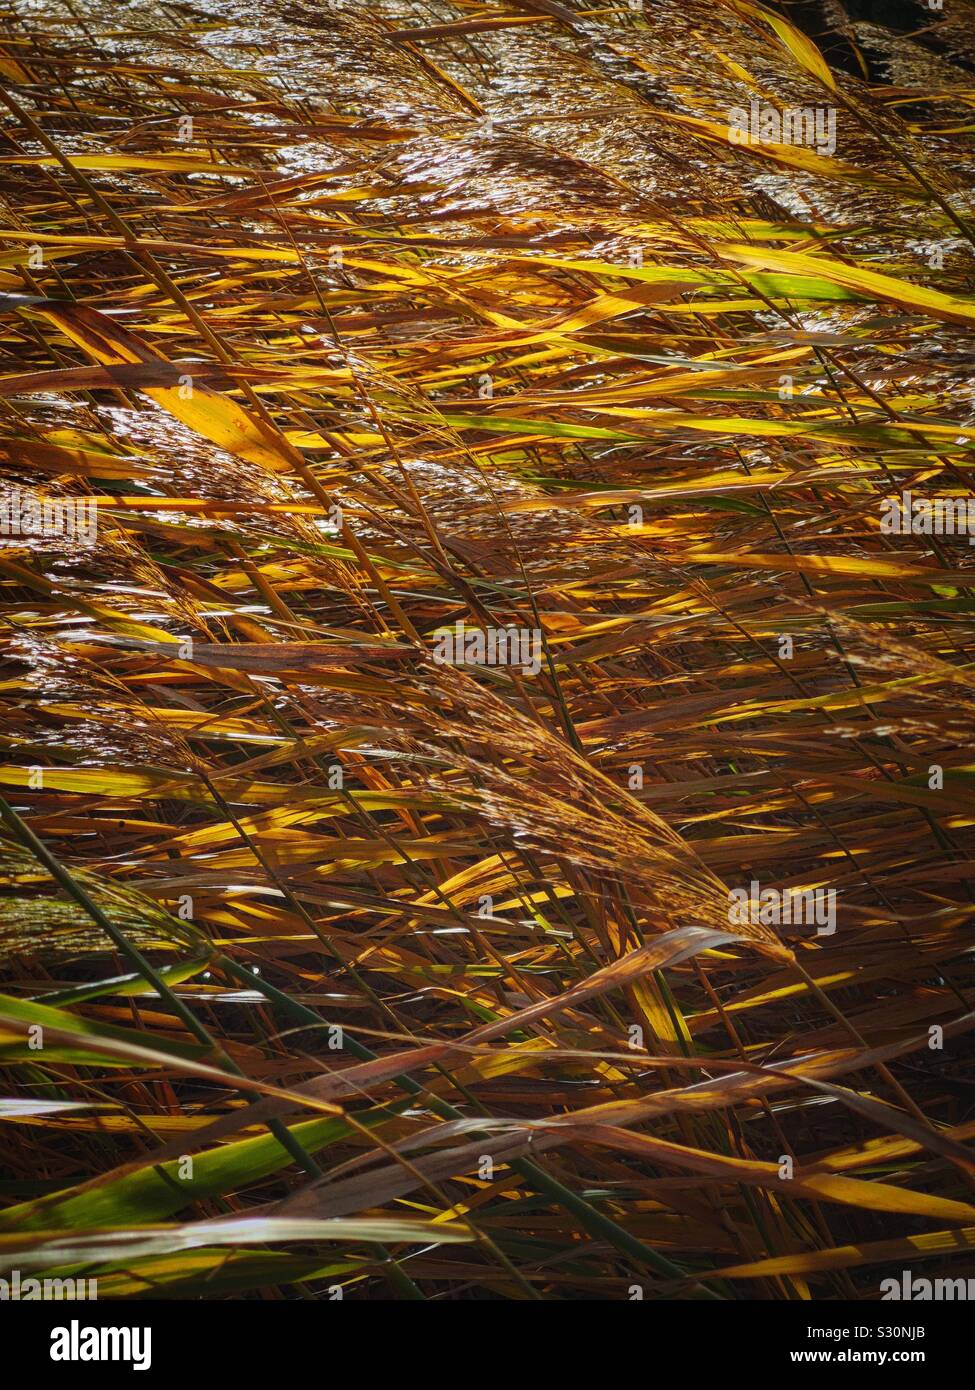 Golden reeds blowing in the wind Stock Photo